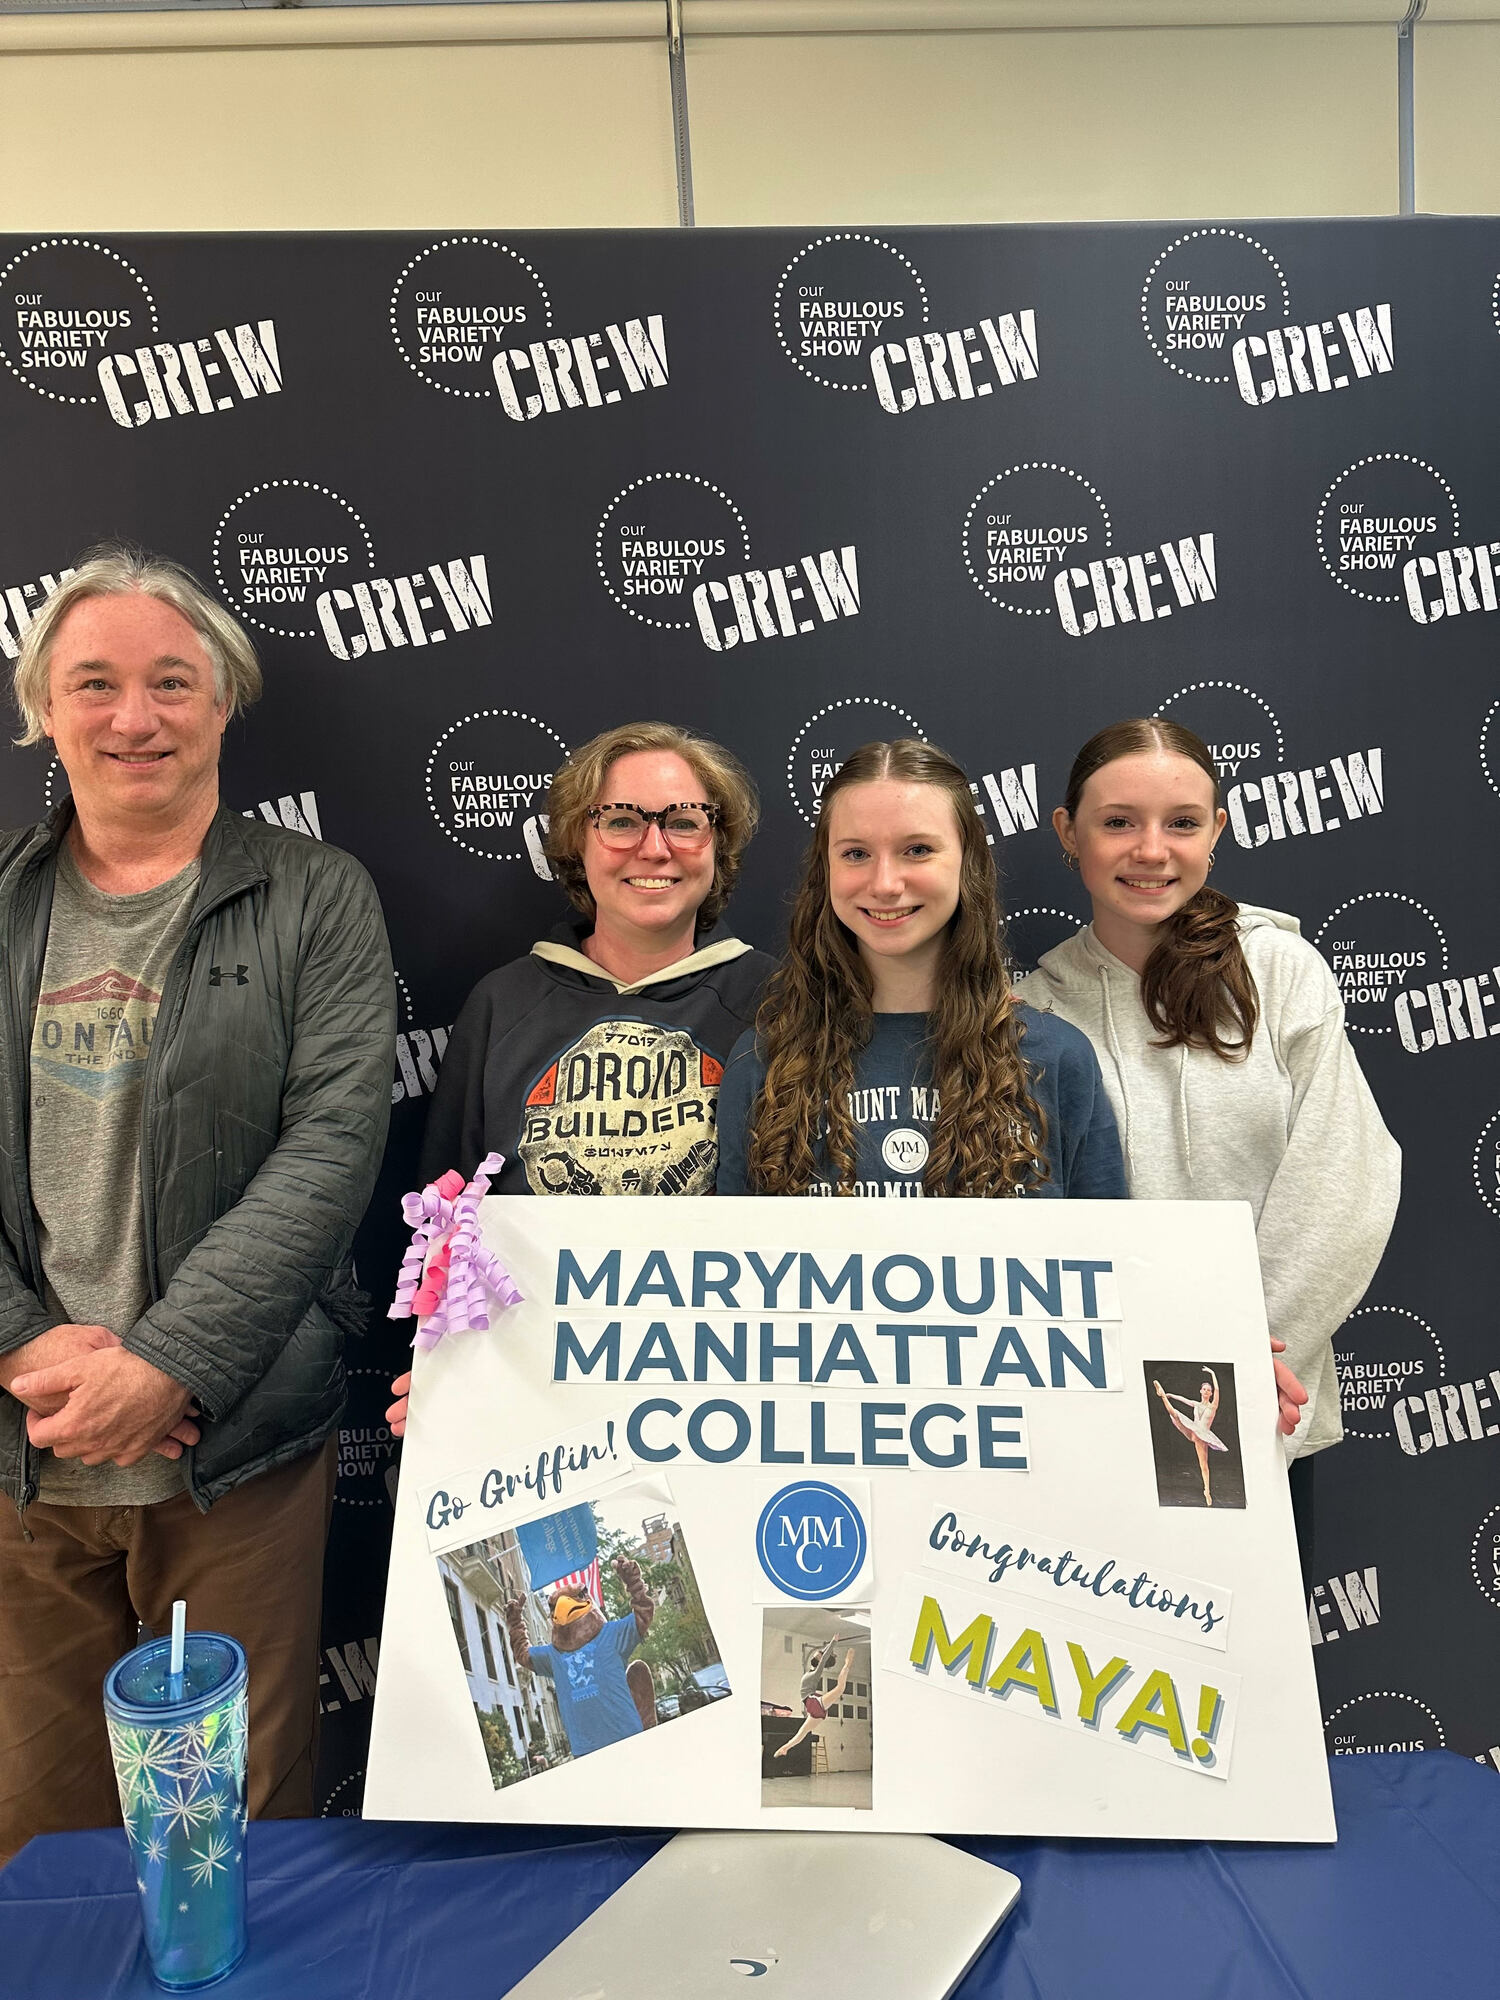 Last Tuesday, Maya Leathers, second from right, committed to Marymount Manhattan College — where she will be majoring in dance with a concentration in media or child development — while at her weekly advanced tap class at Our Fabulous Variety Show in East Hampton. Leathers, an East Hampton resident who has been studying ballet and other forms of dance since she was a small child, was joined by her father, Chris Leathers, her mother, Jennifer Van Arsdale and her sister, Zoe.  COURTESY ANITA BOYER